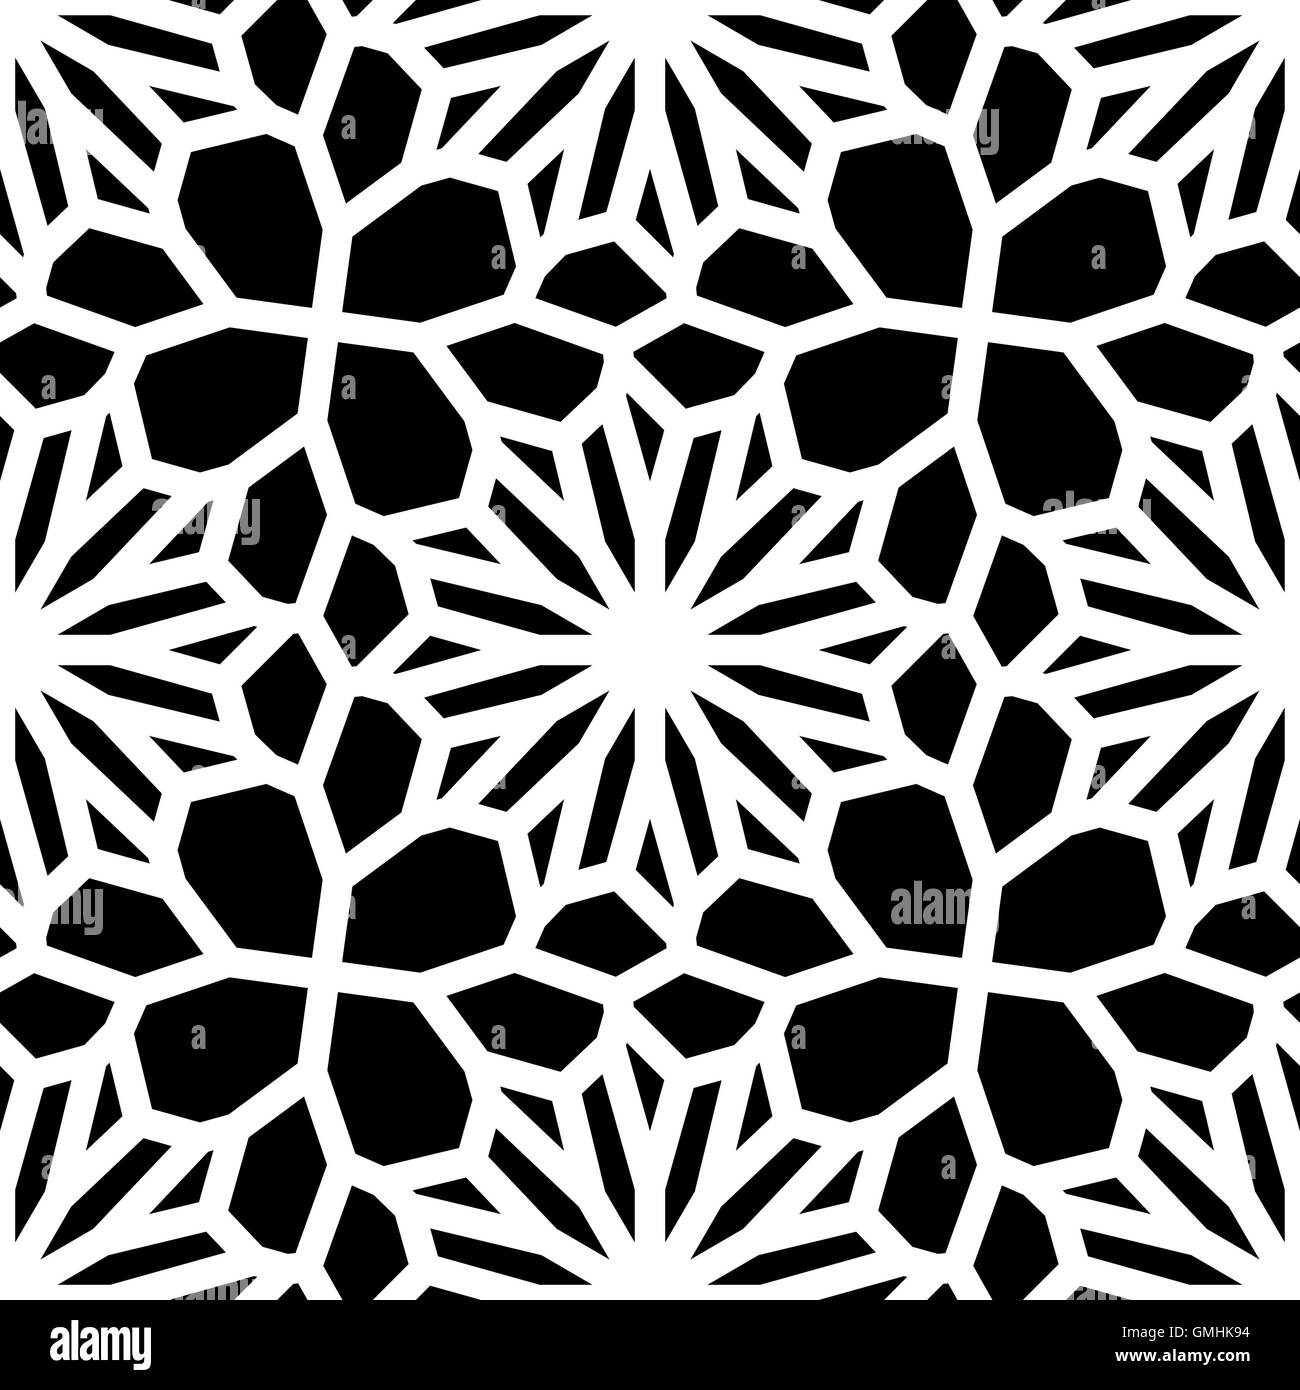 Vector Black & White Seamless Geometric Square Lace Grid Pattern Stock Vector